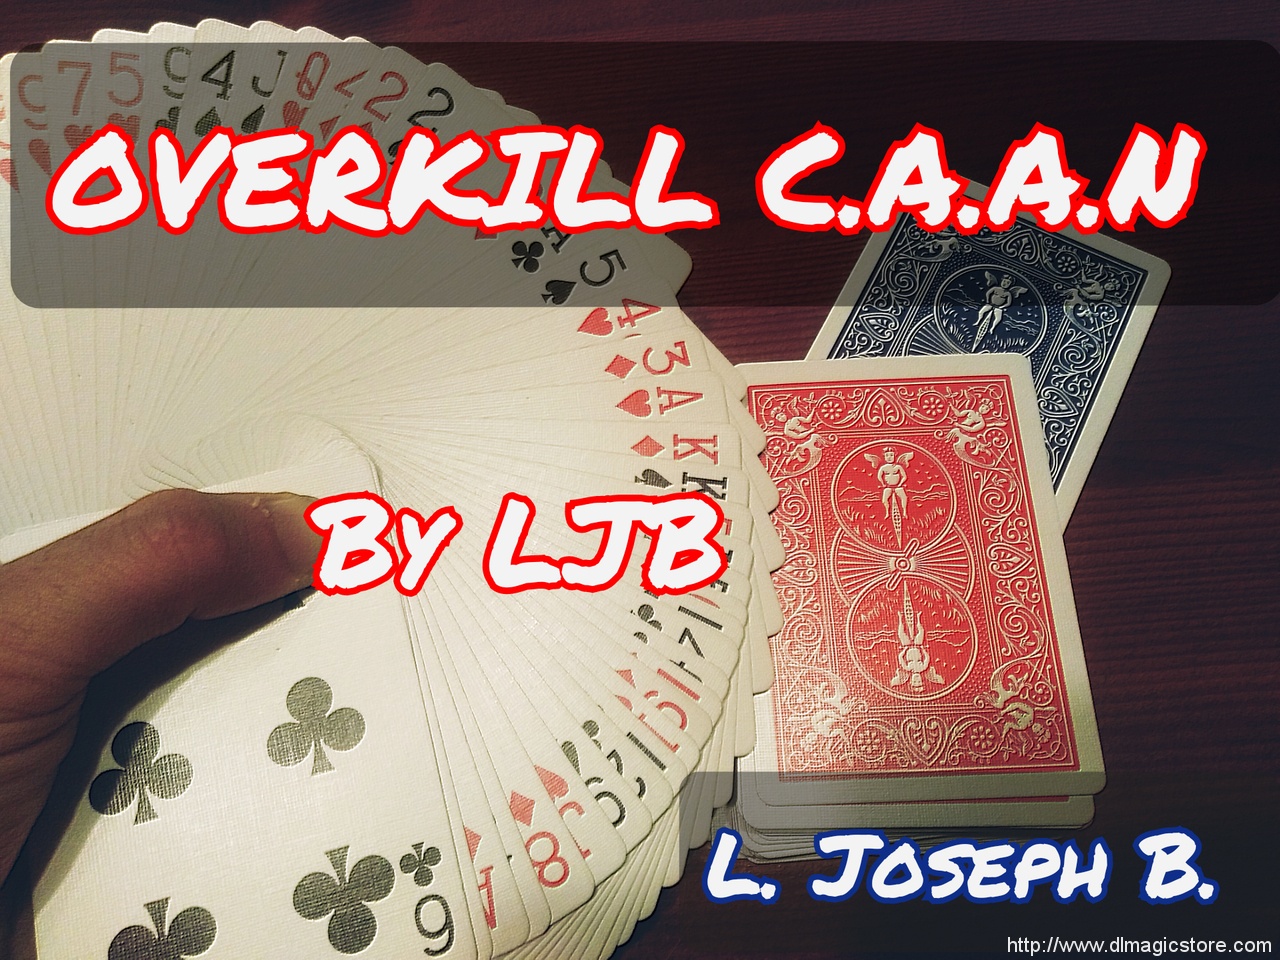 OVERKILL C.A.A.N By Joseph B. (Instant Download)